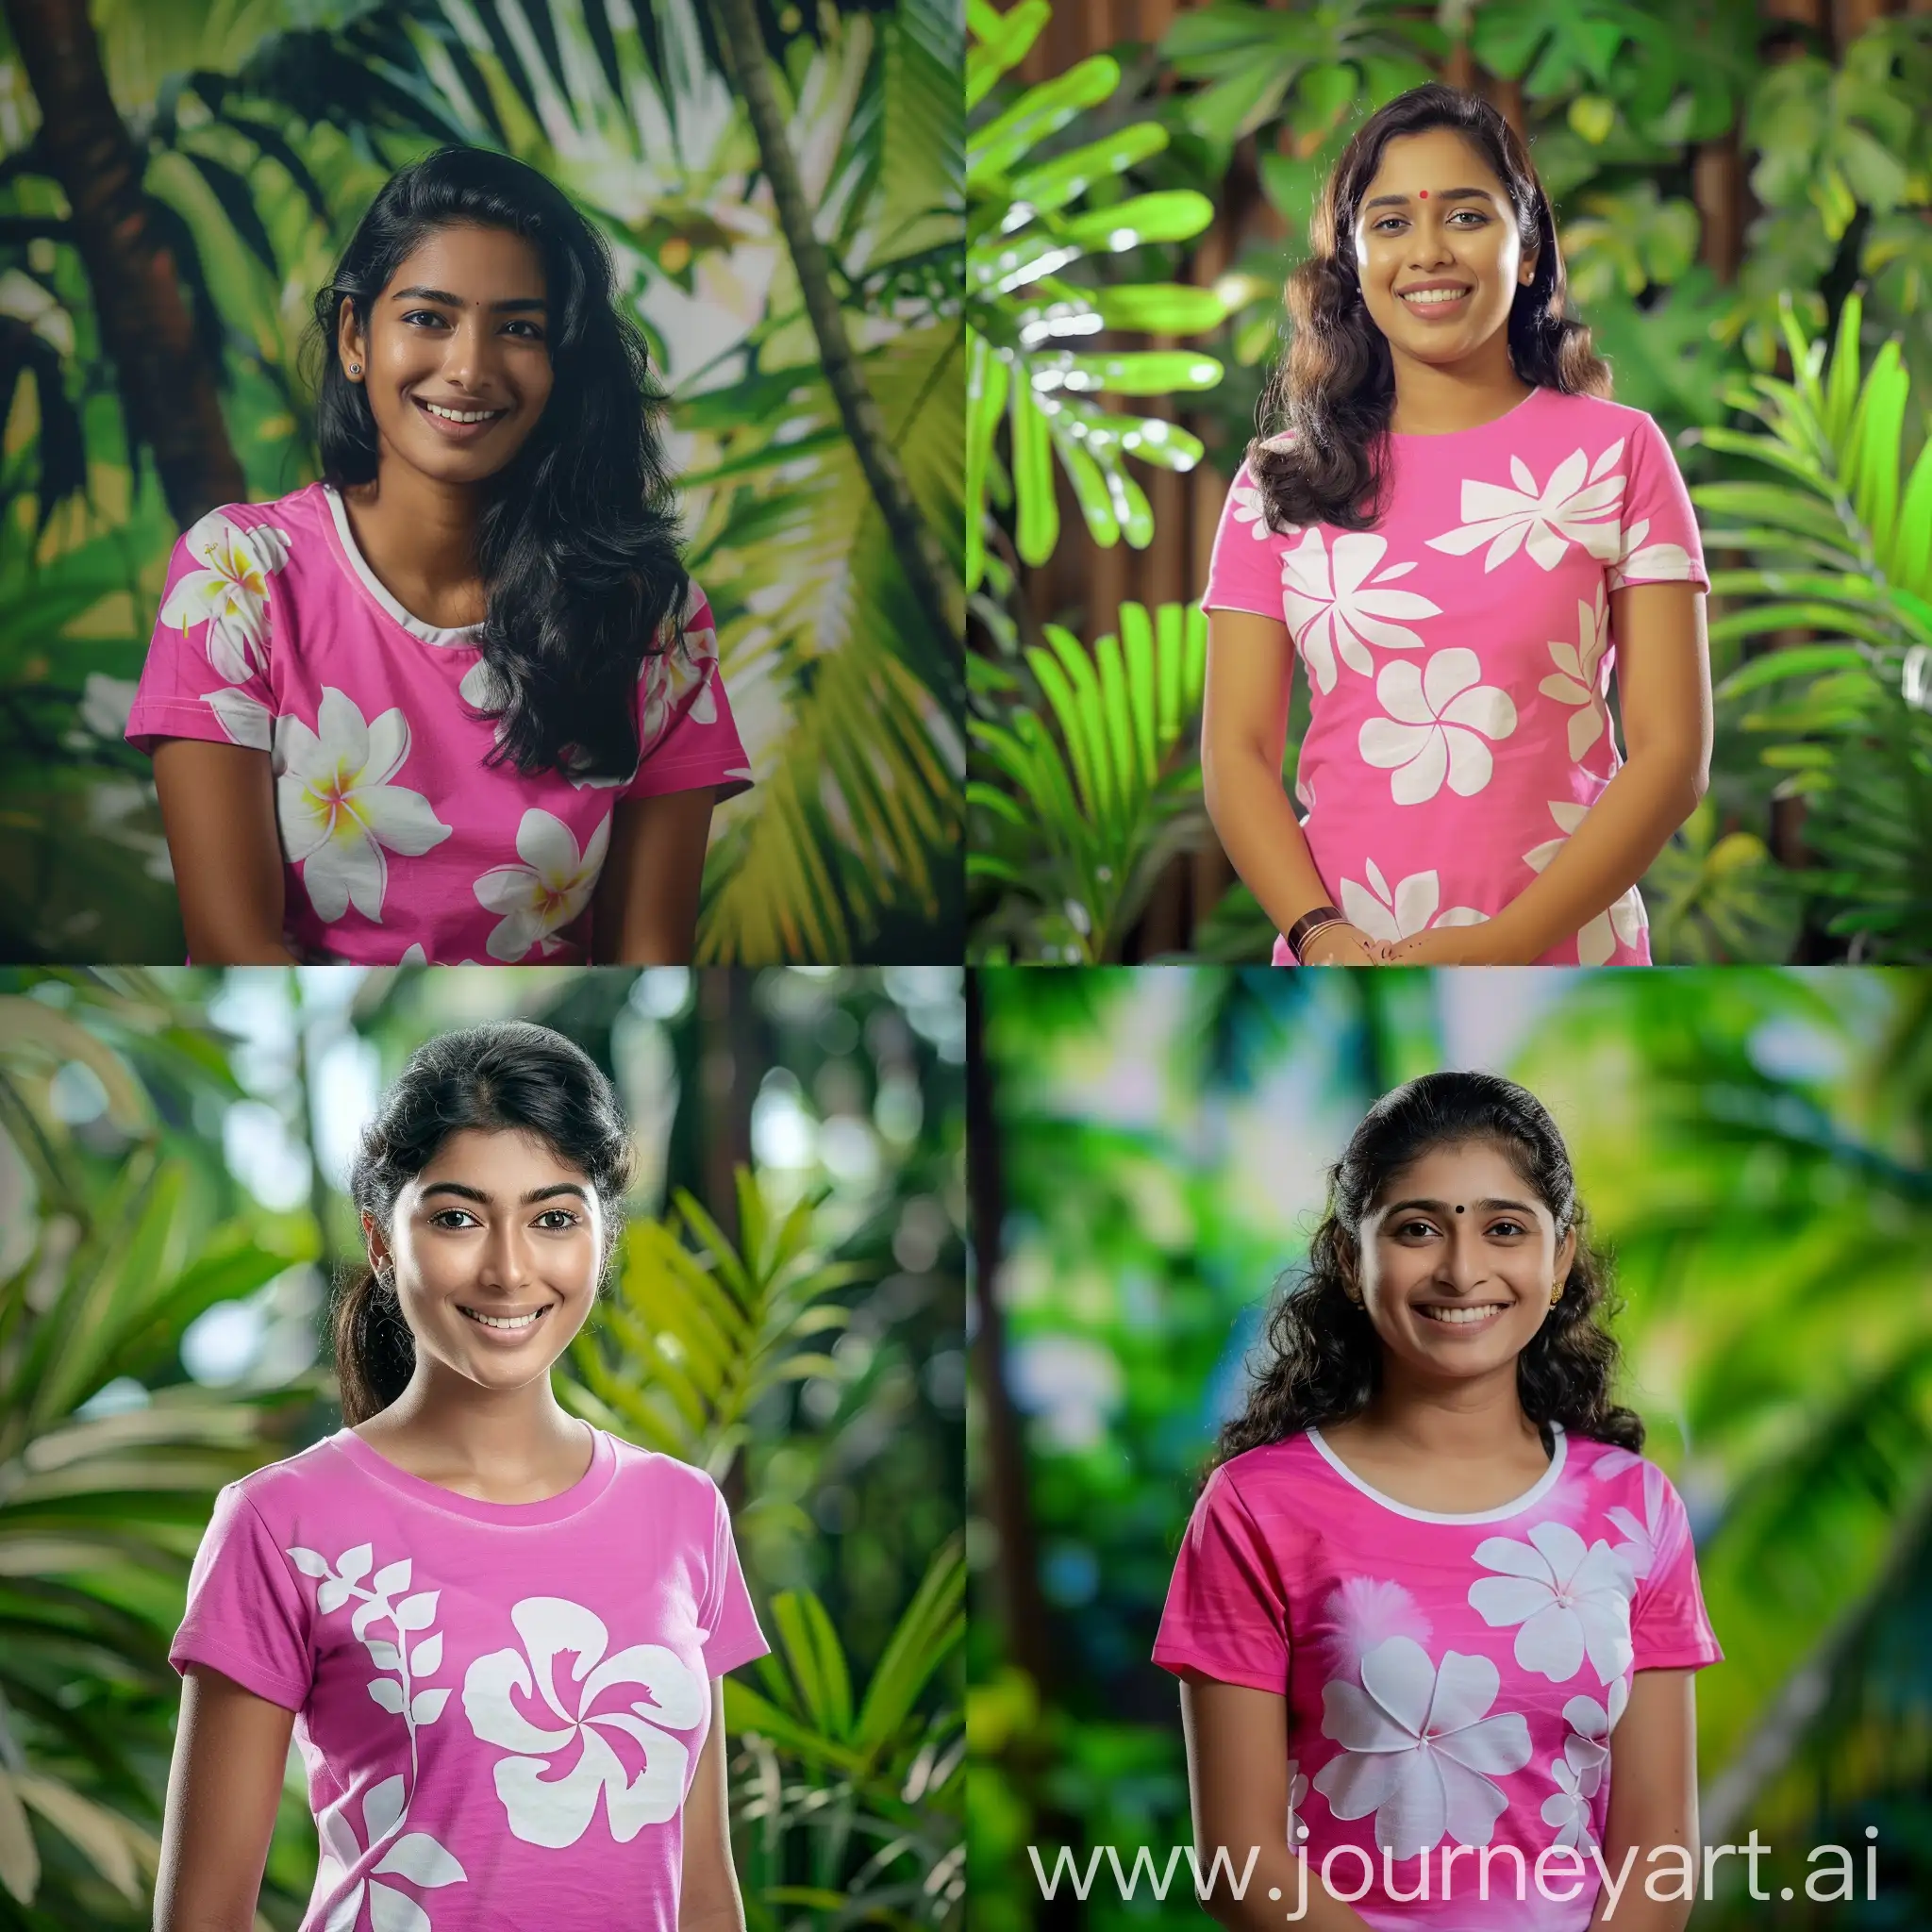 Alluring-Malayali-Teenage-Woman-Smiling-in-Pink-and-White-Flower-TShirt-Against-Tropical-Jungle-Background